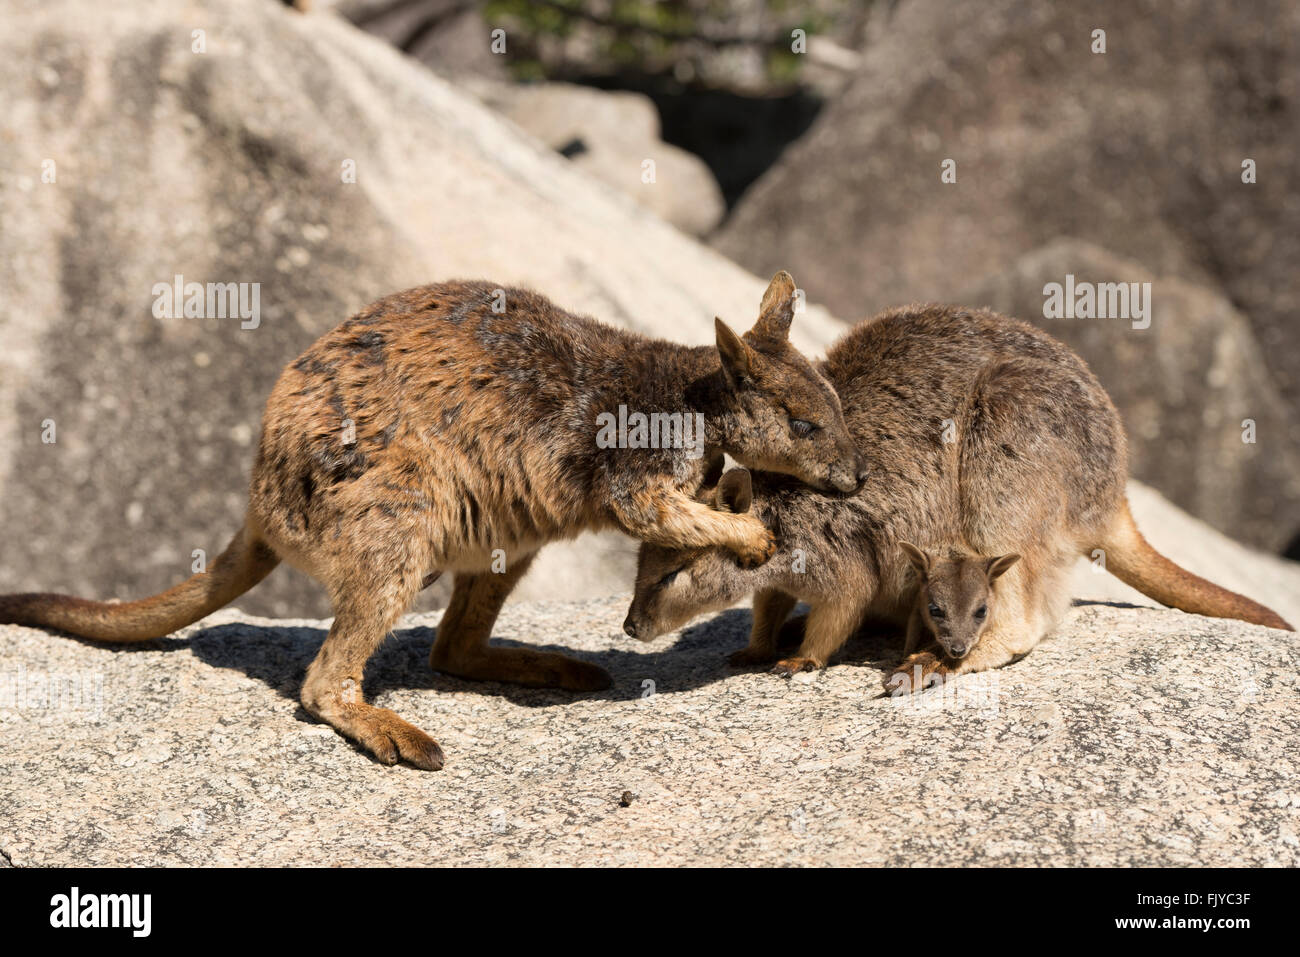 Mareeba rock-wallaby mom with joey in her pouch (Petrogale mareeba)  with male wallaby grooming mommy. Stock Photo